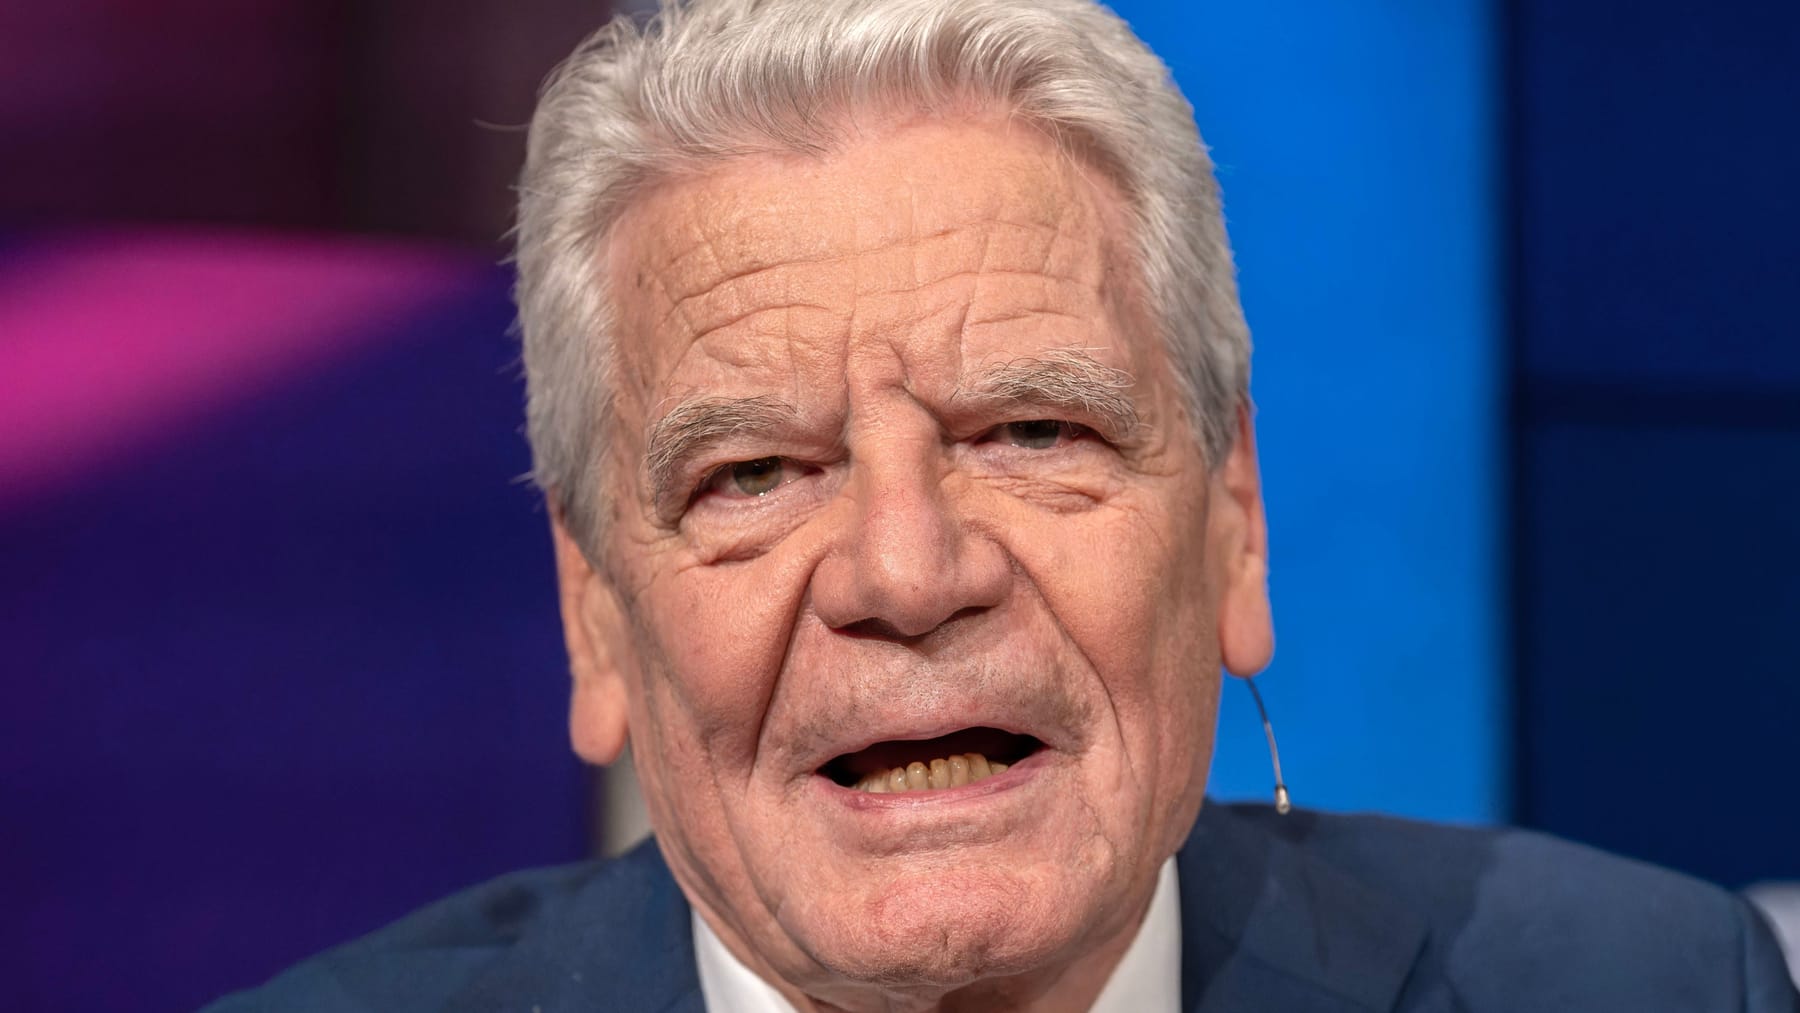 At Maischberger, Gauck and Lafontaine clash - News Directory 3